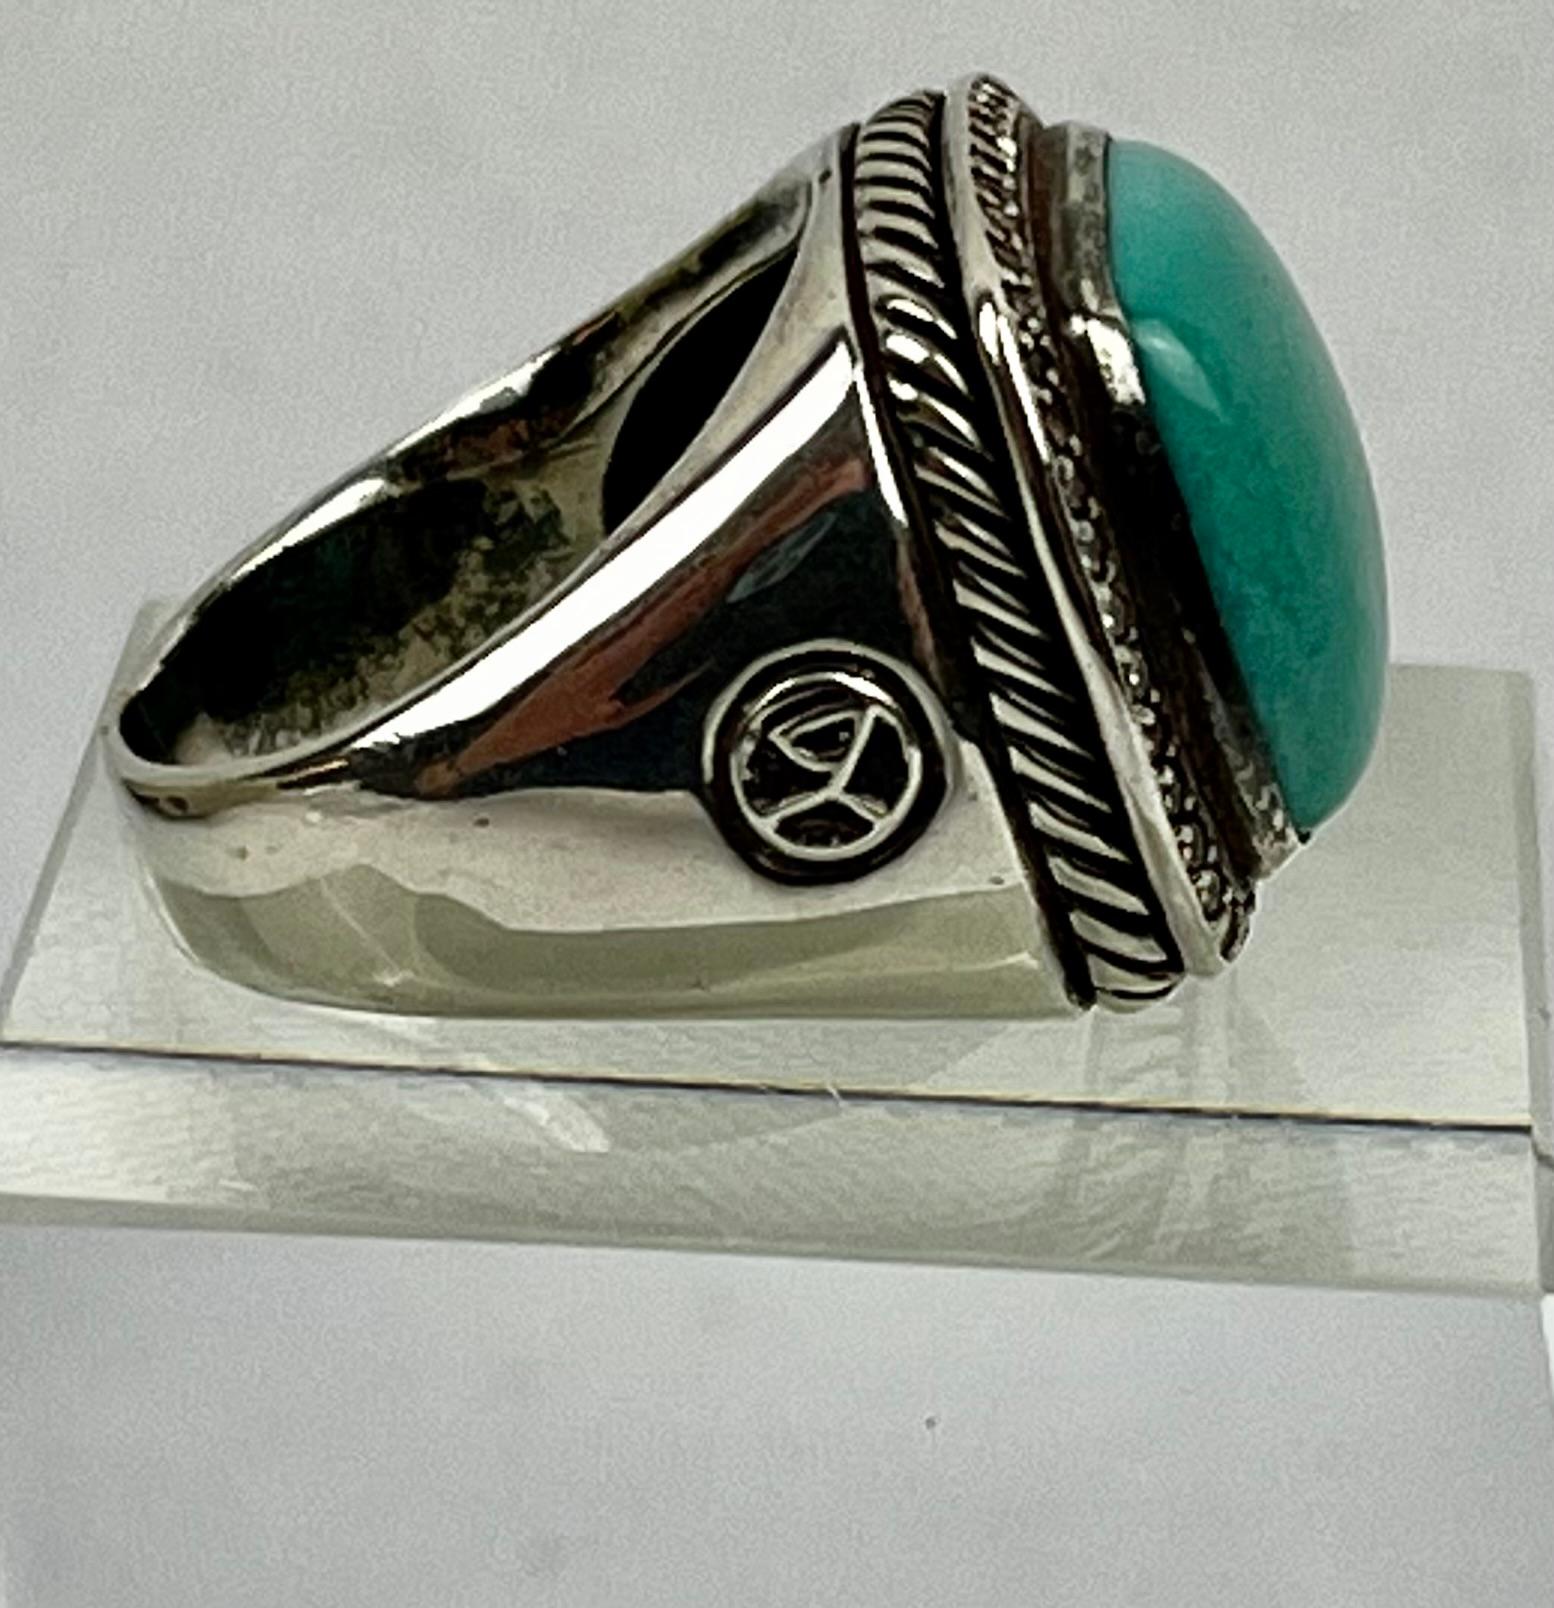 Sterling silver ring by David Yurman.  The stone is a square cut cabochon turquoise surrounded by 42 full cut diamonds approximately .75 points each.  It is approximately a size 9.
This ring can be sized.
Weight- 14.7 grams or .51 troy ounces